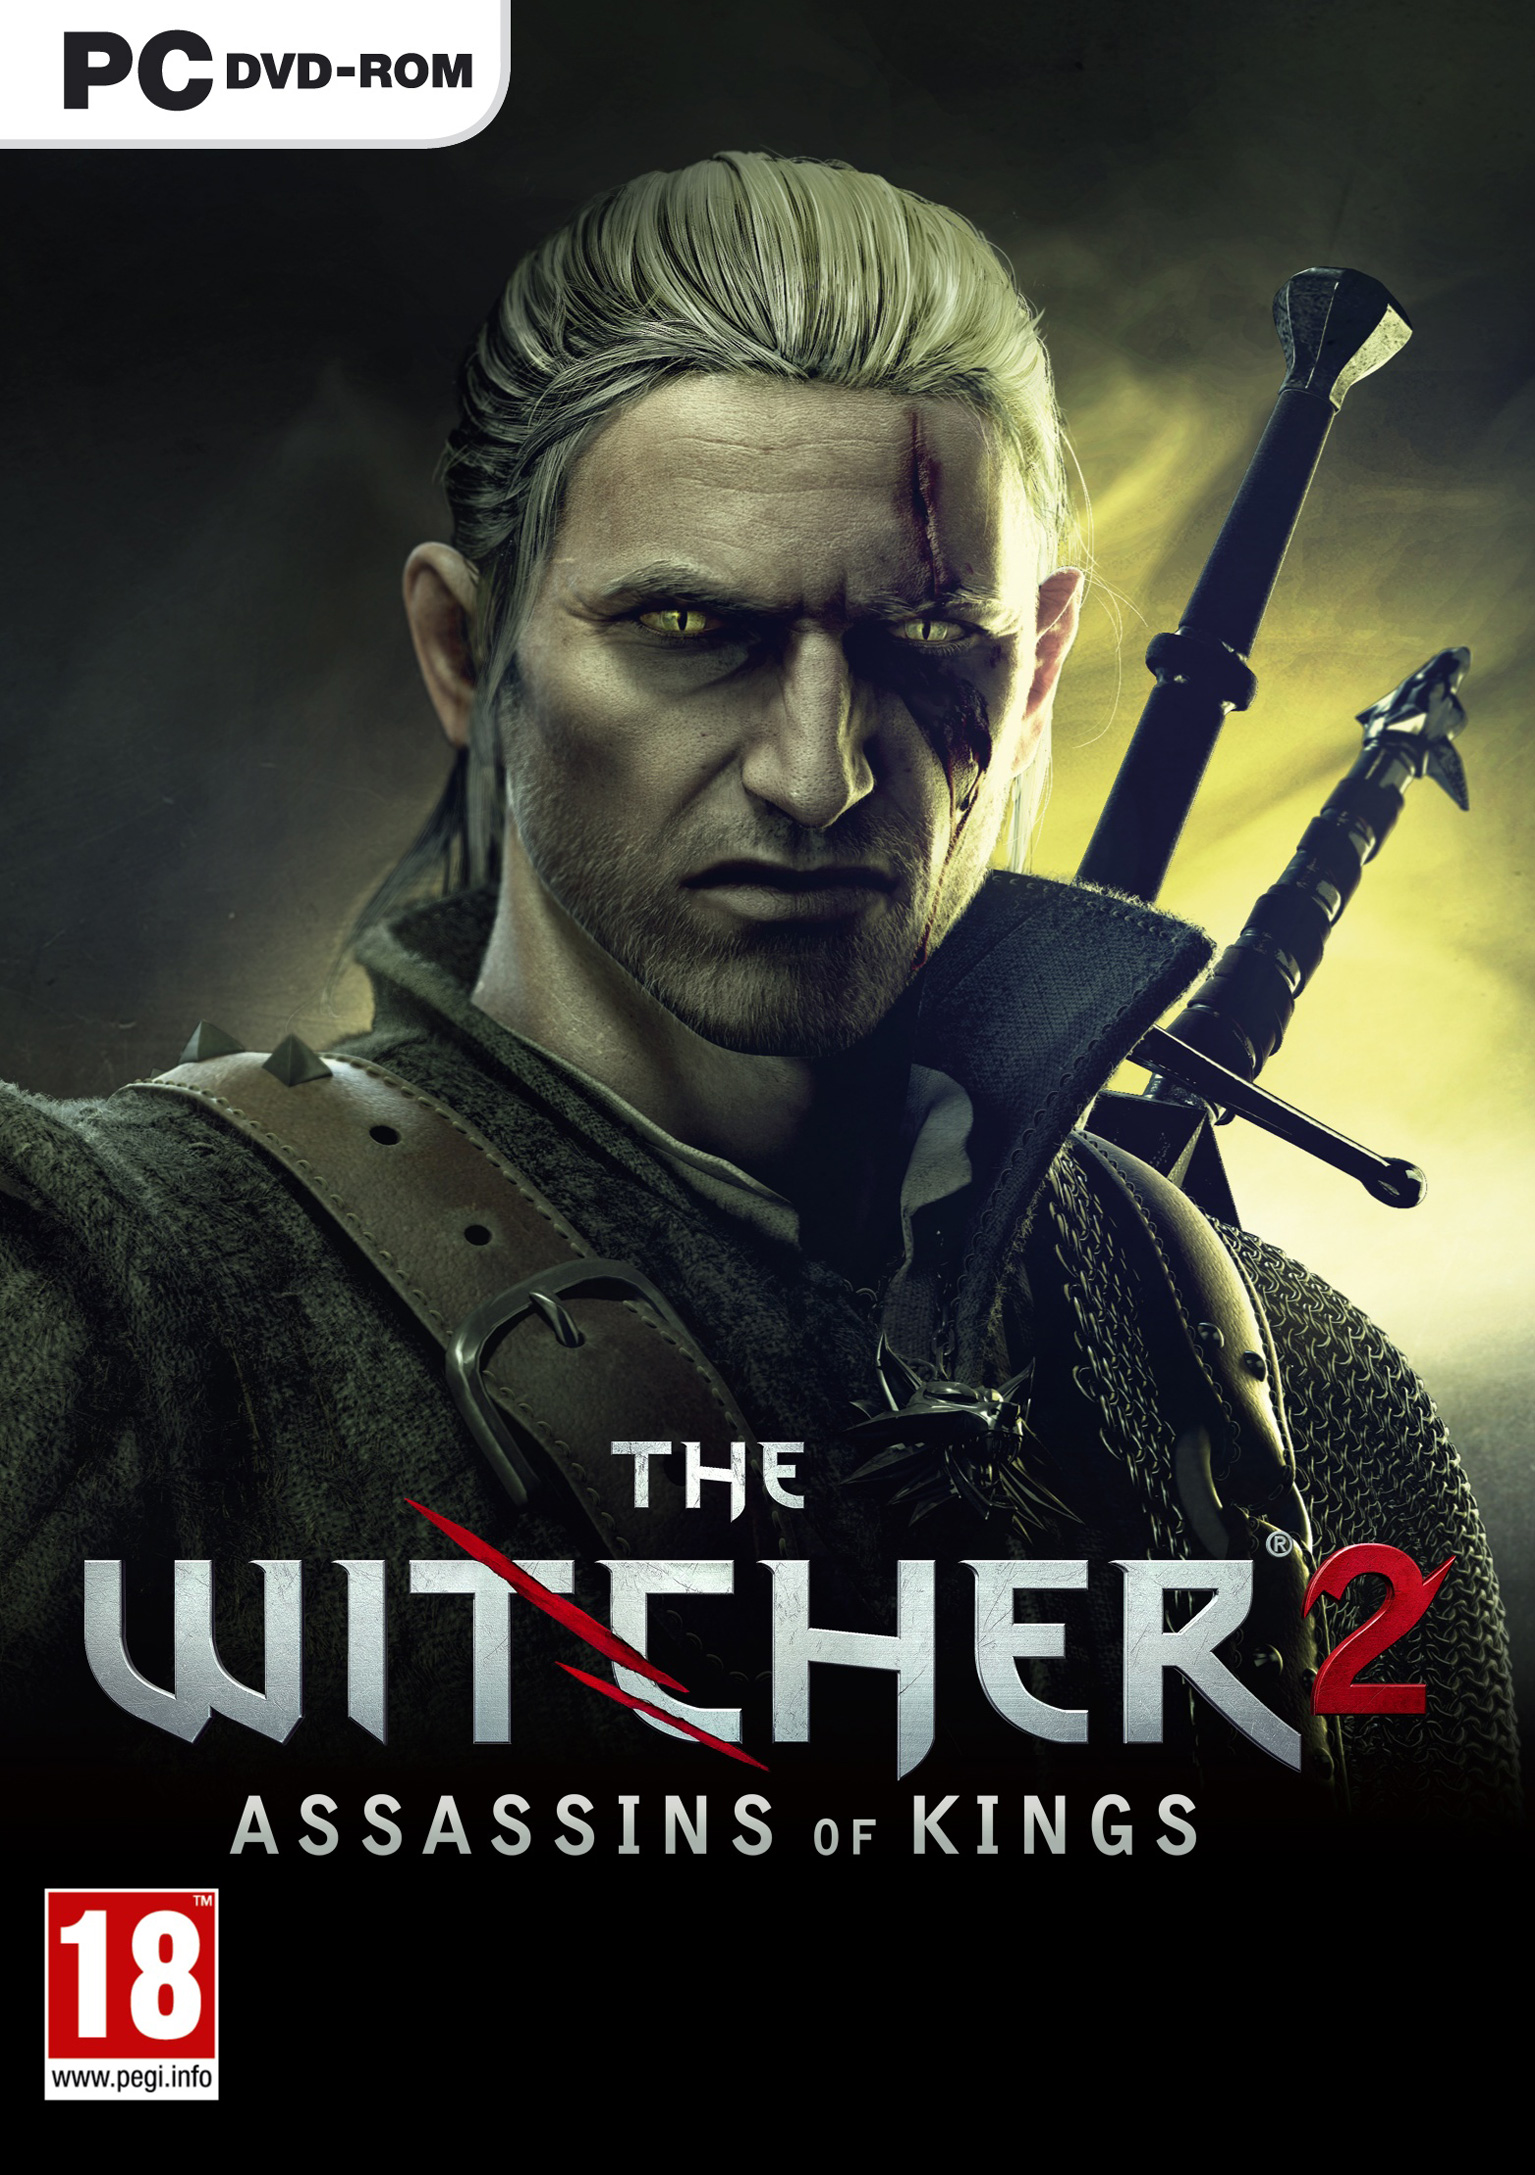 The Witcher 2: Assassins of Kings - pedn DVD obal